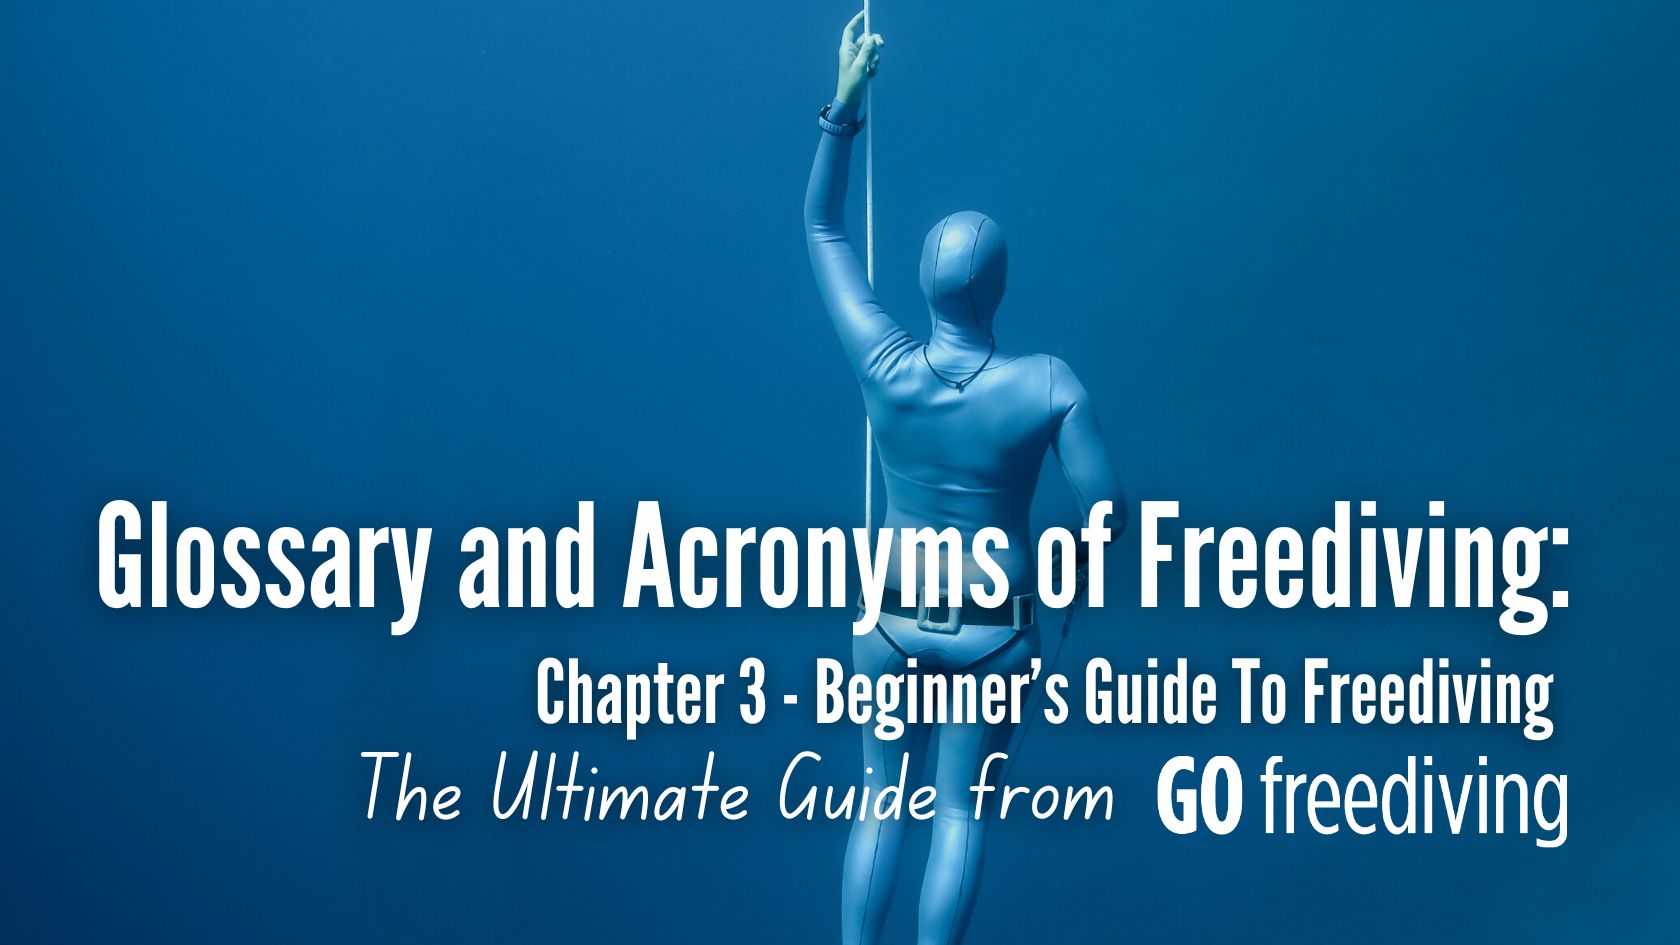 Glossary and Acronyms of Freediving